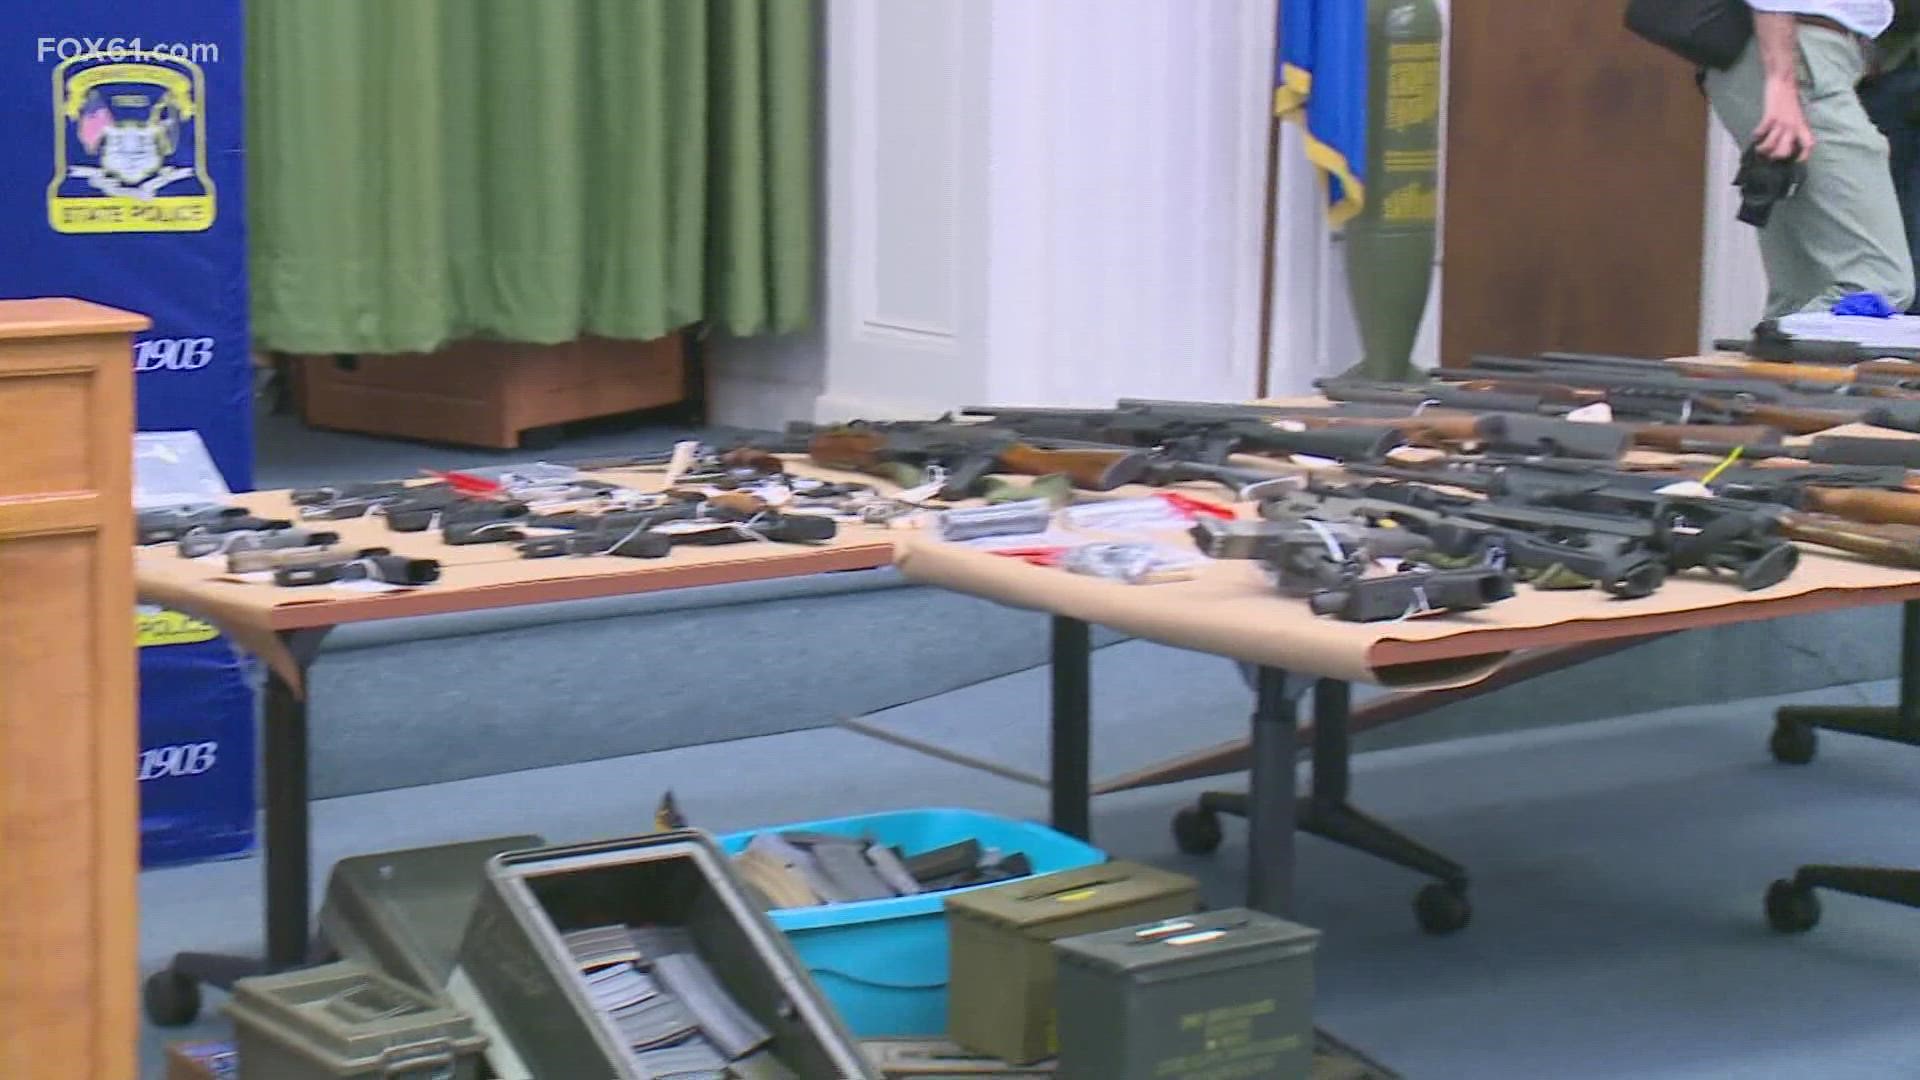 Just this week, there was a massive state police bust where more than 125 firearms were seized.